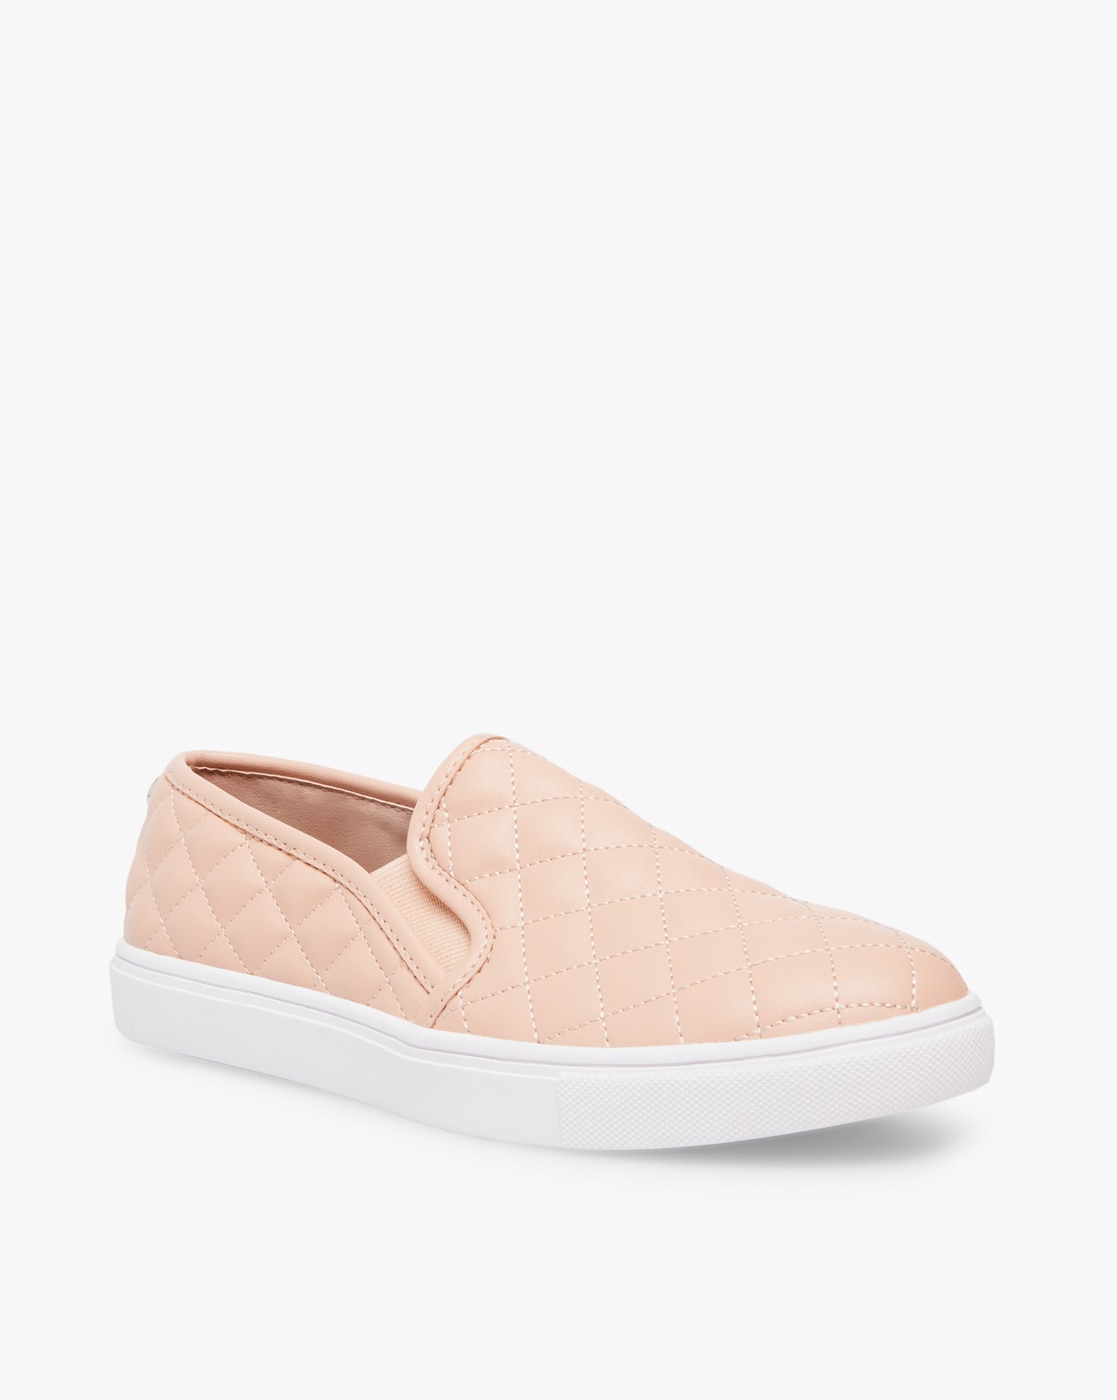 steve madden quilted loafers